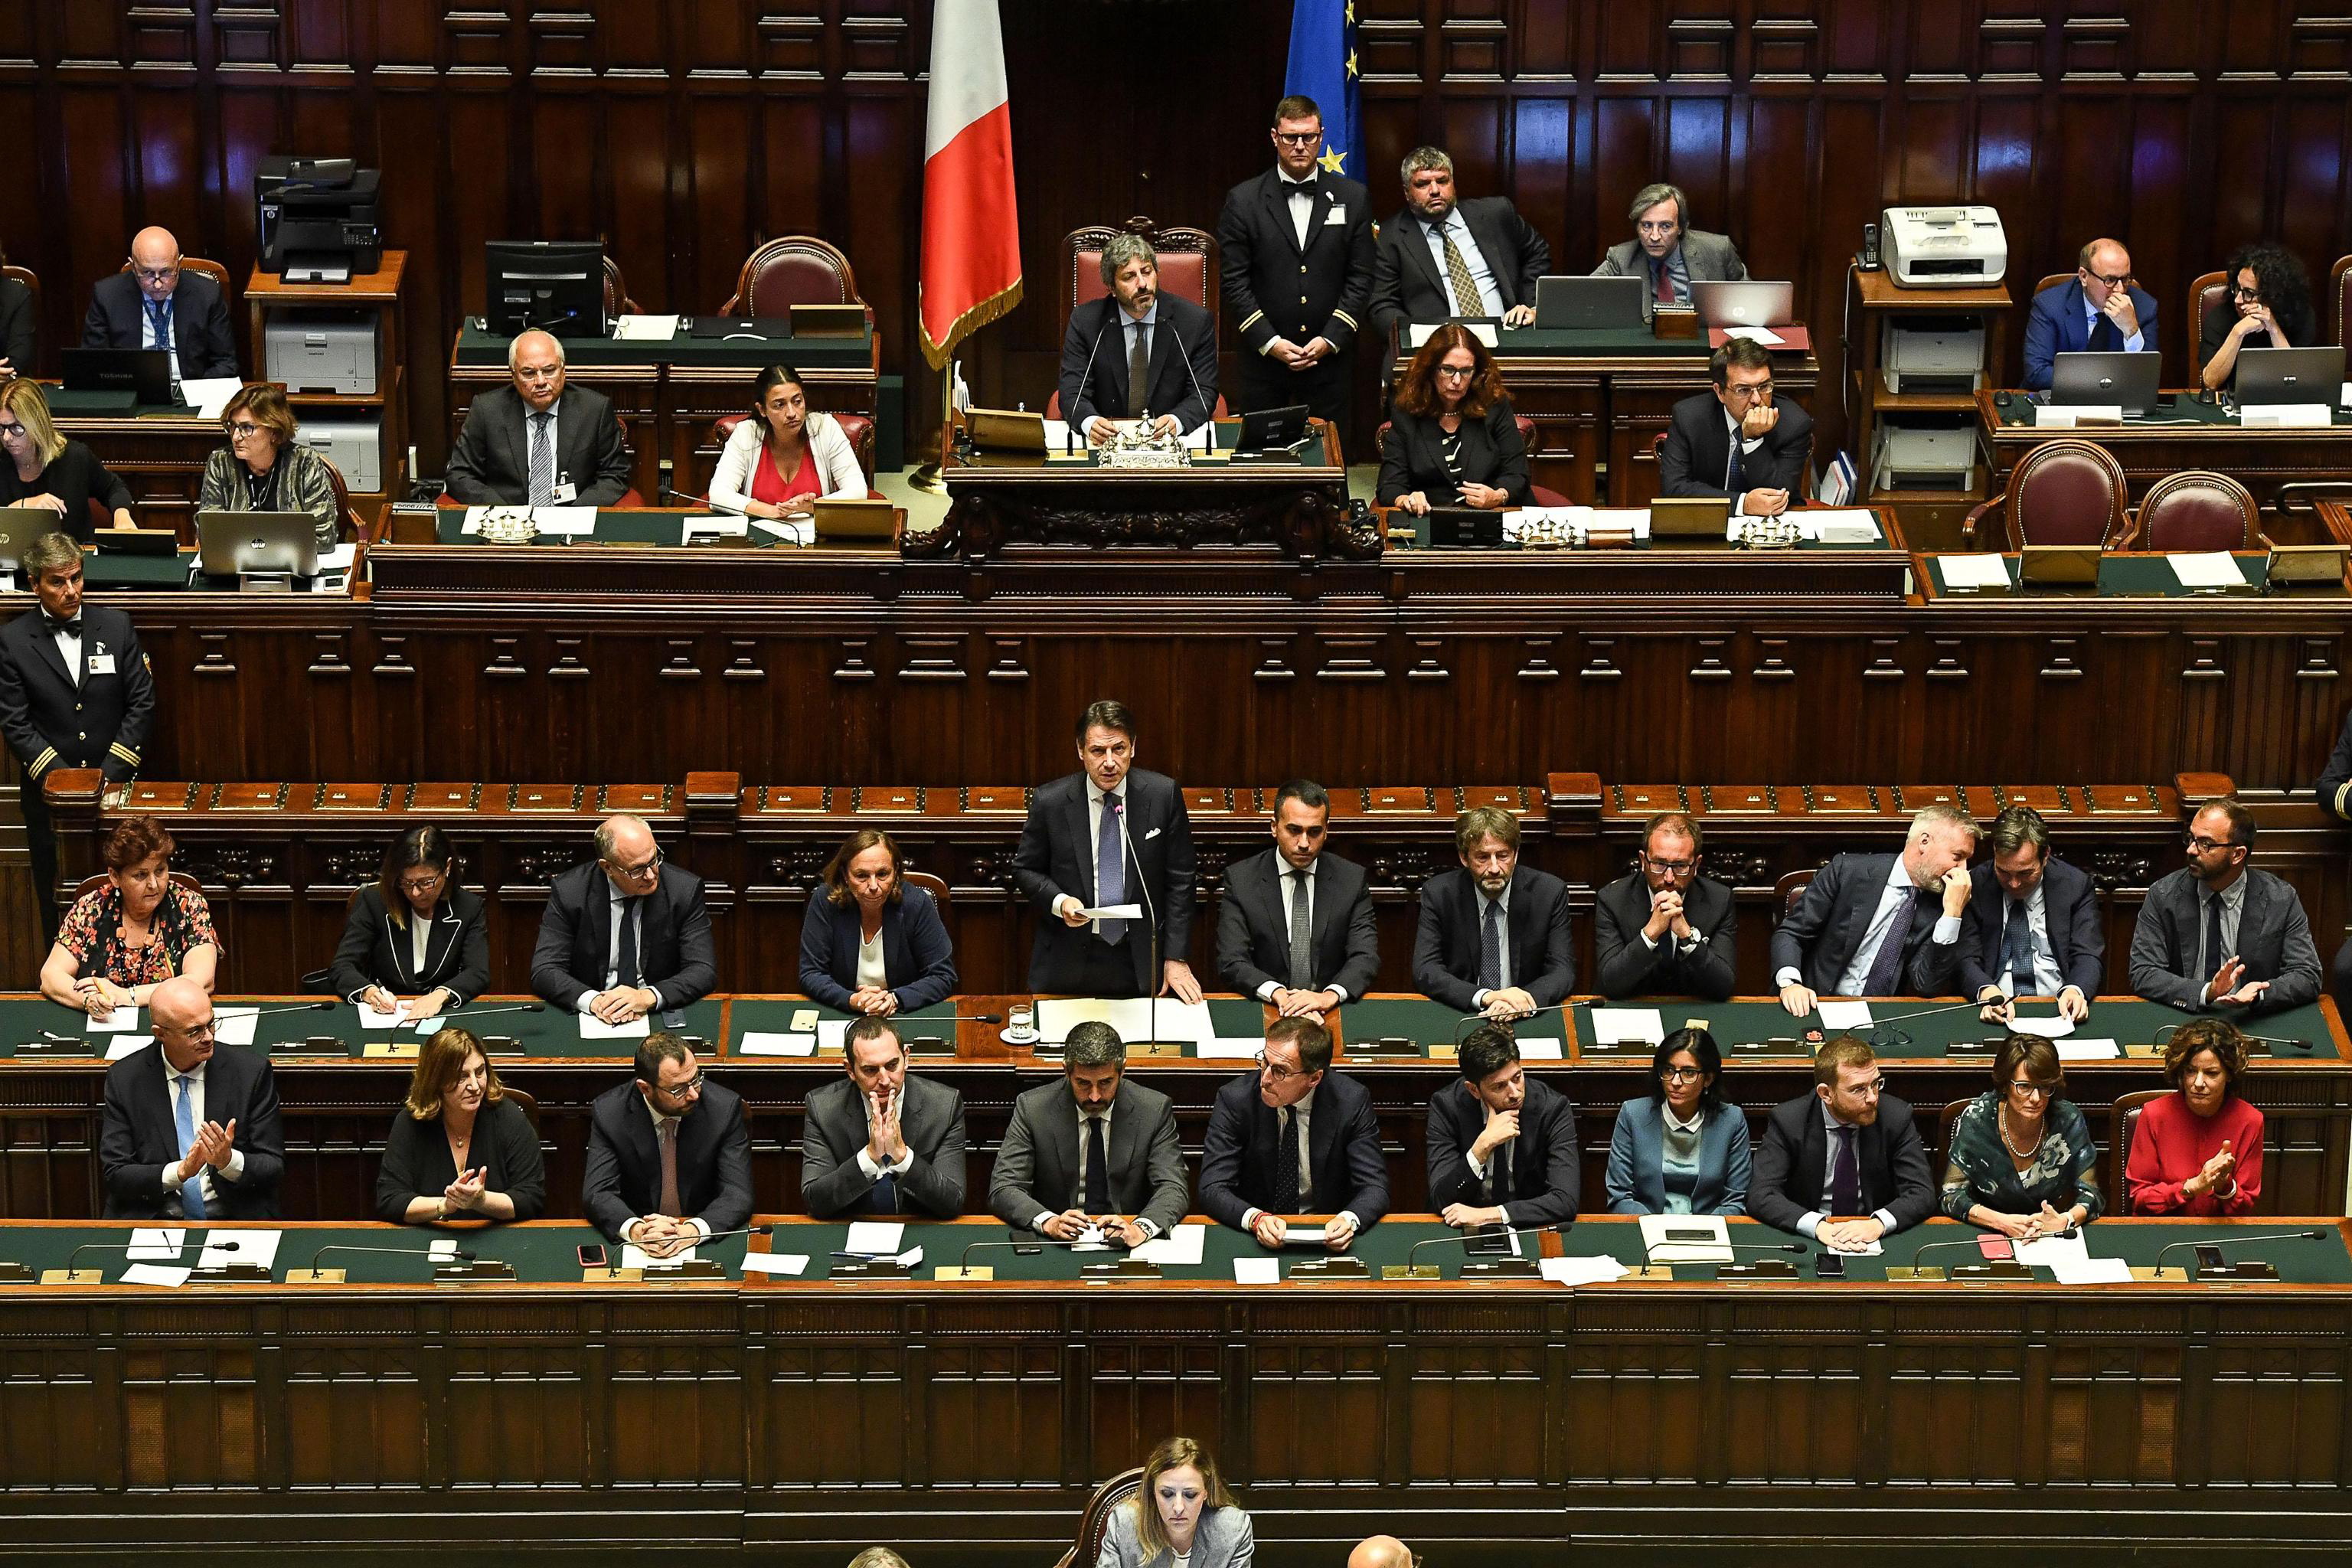 epa07829576 Italian Premier Giuseppe Conte (C) stands during his address to the Lower House ahead of a confidence vote, in Rome, Italy, 09 September 2019. Conte presented on the day his new government's programme in the Lower House ahead of the first of two confidence votes that the executive is set to face in parliament. His new government is a coalition between the anti-establishment 5-Star Movement (M5S) and the center-left Democratic Party (PD).  EPA/ALESSANDRO DI MEO